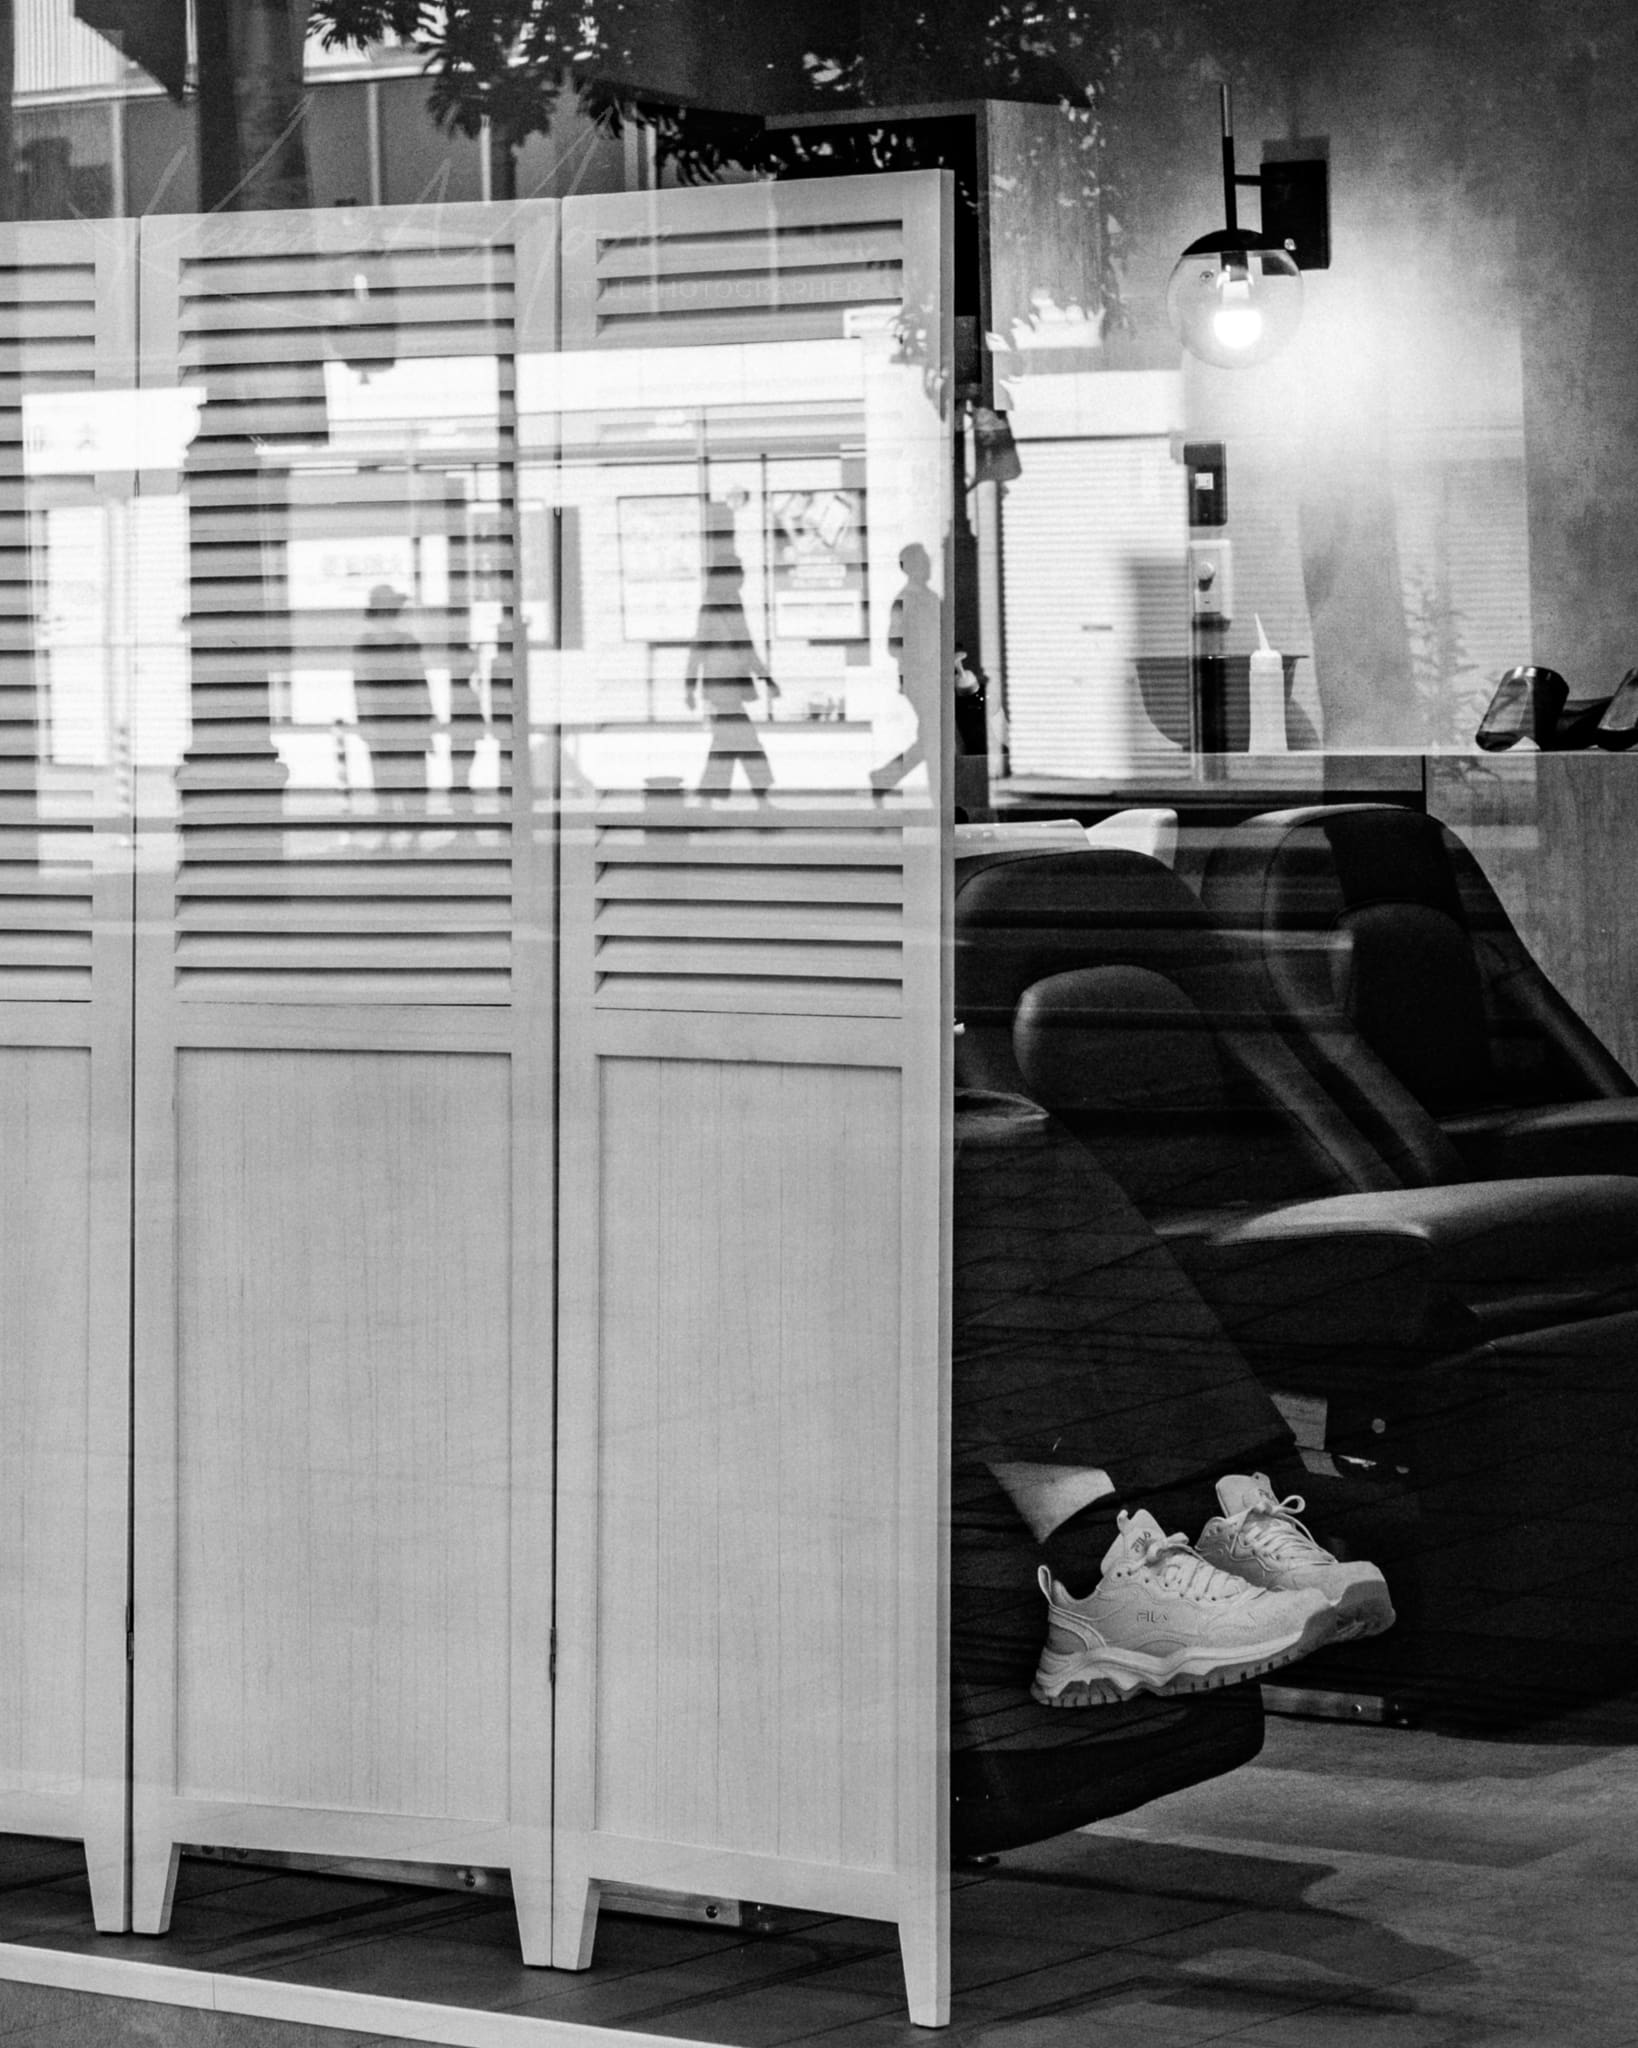 Black and white image of a cozy salon interior with room divider and street view.